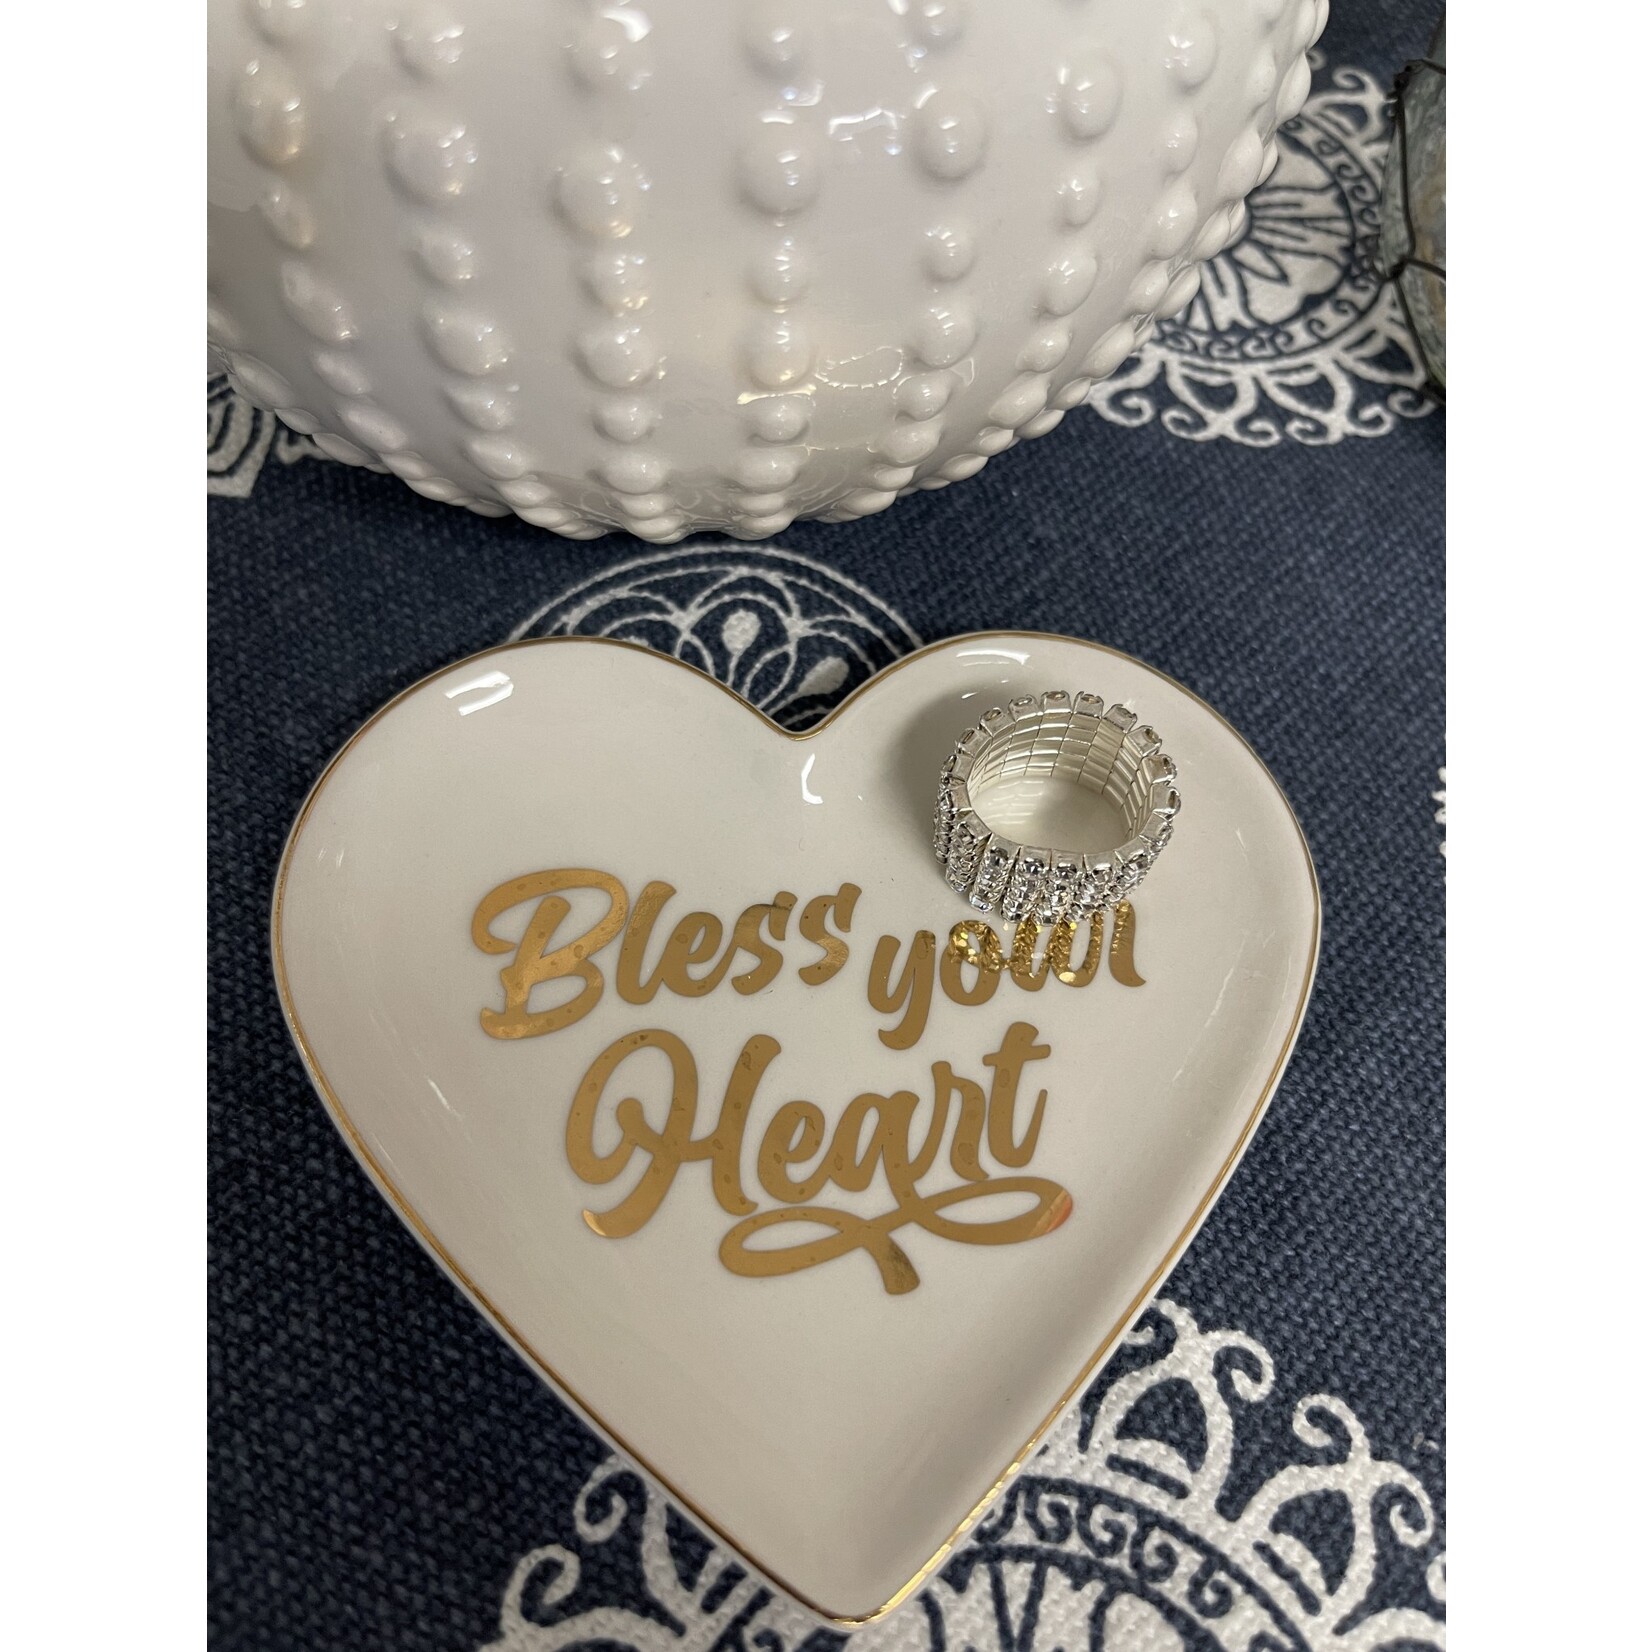 Totalee Bless Your Heart Trinket Tray in Heart Shape/ Gold Ltr.